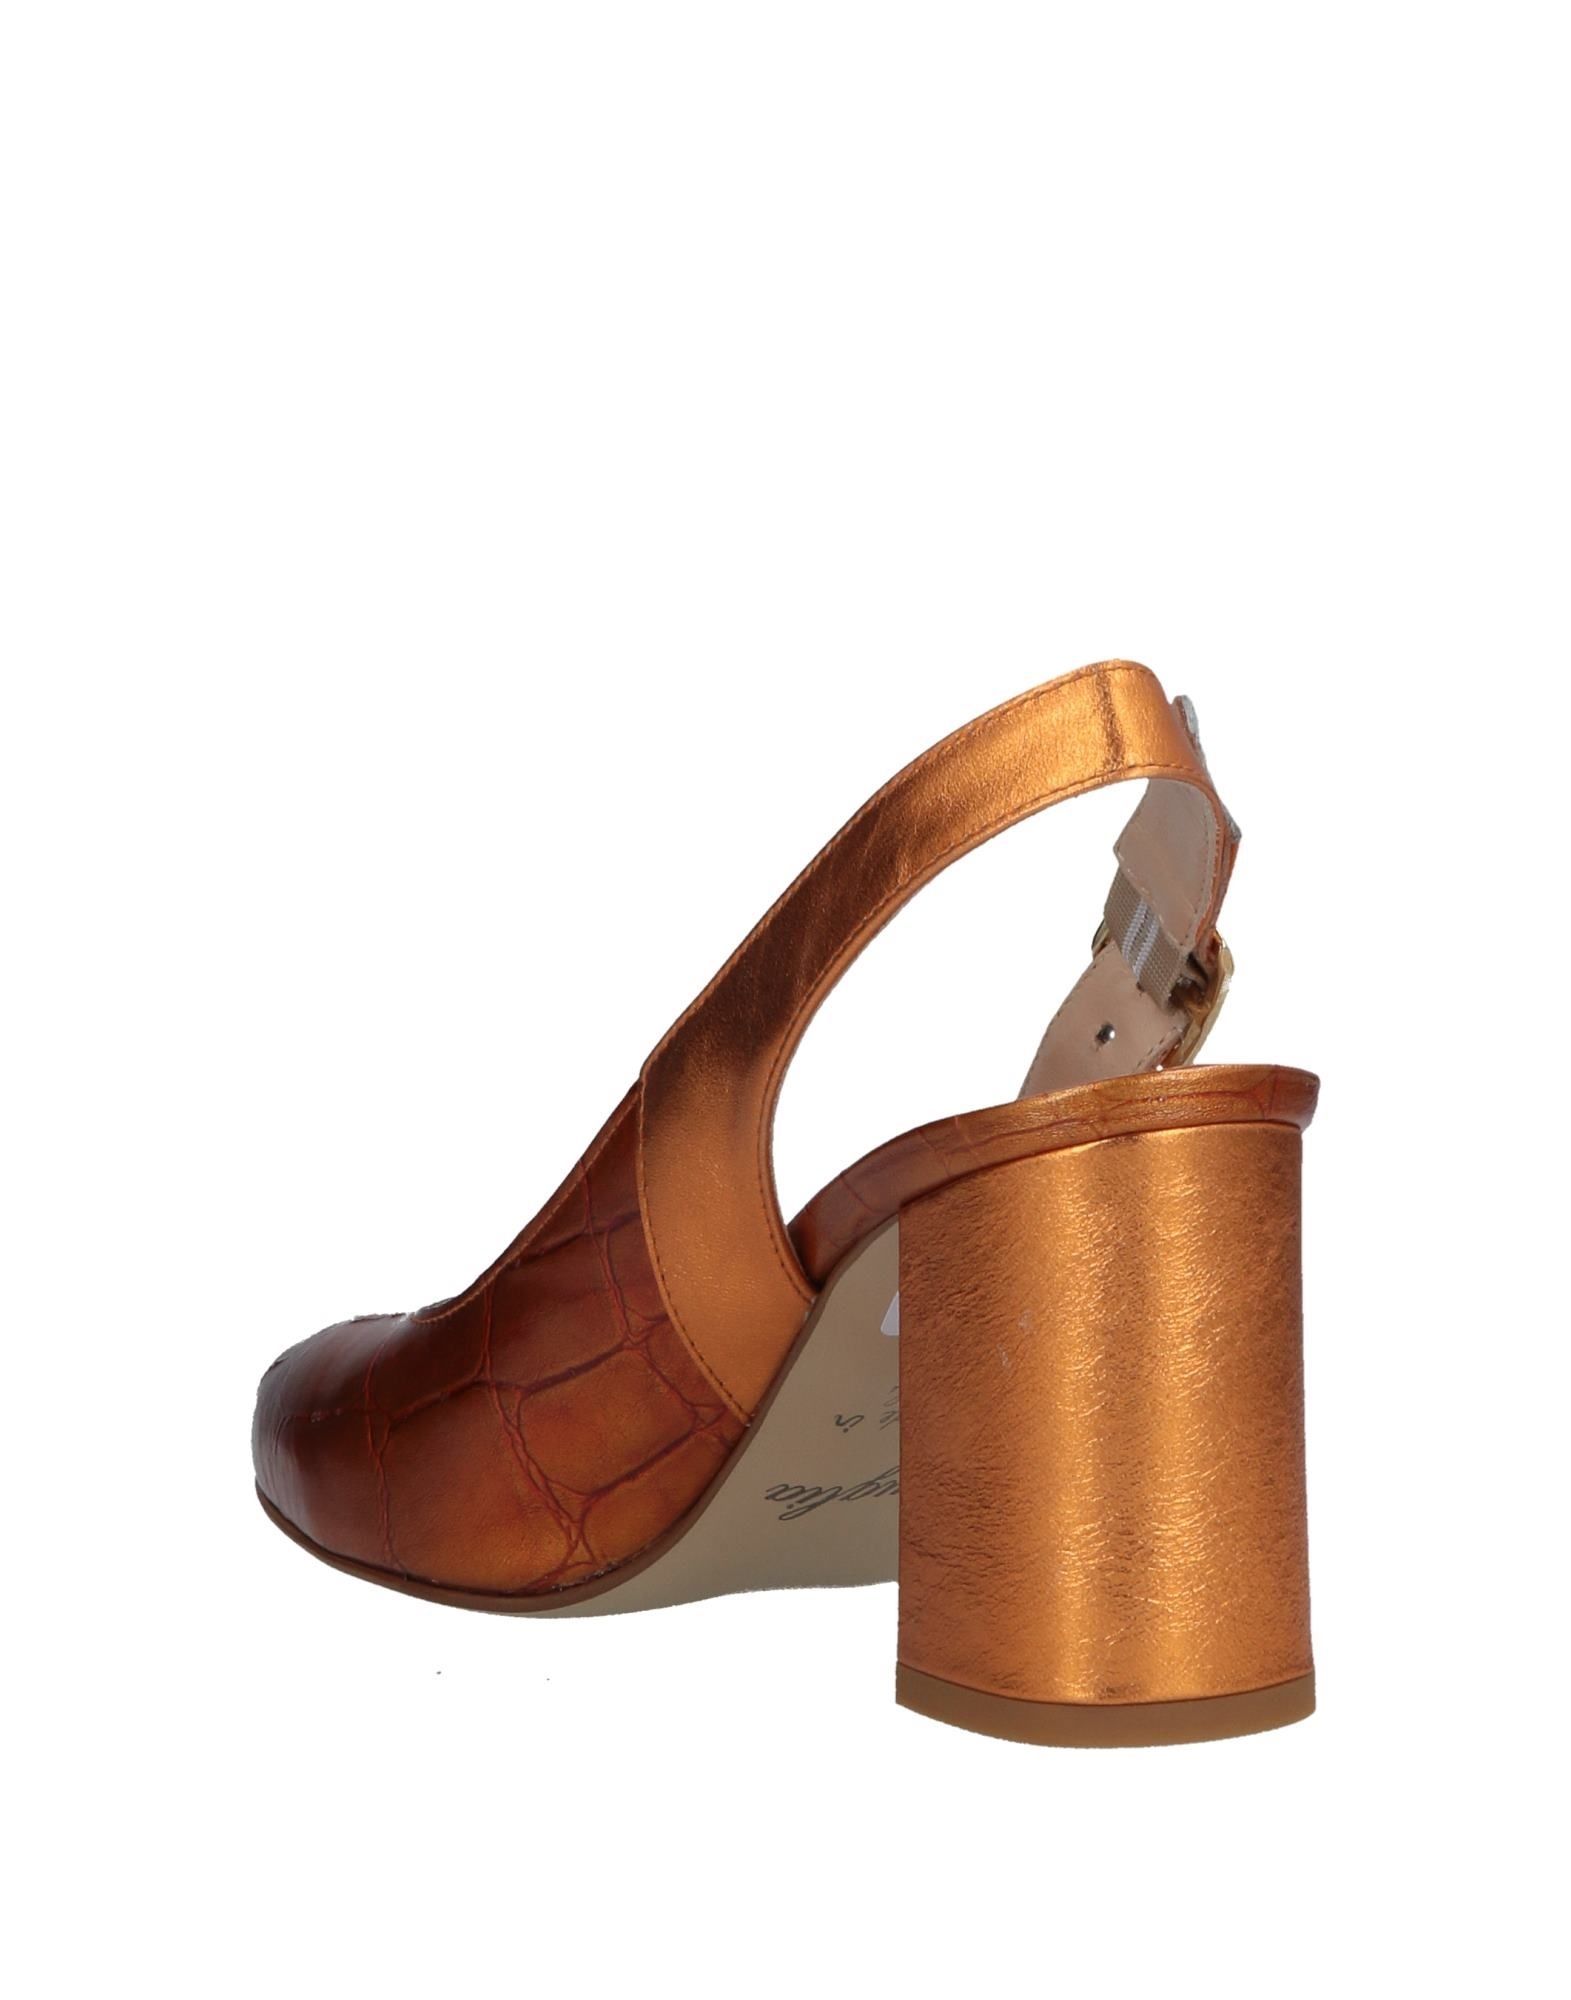 leather, laminated effect, no appliqués, solid colour, printed leather, buckle, round toeline, square heel, covered heel, leather lining, leather sole, contains non-textile parts of animal origin, sling-backs